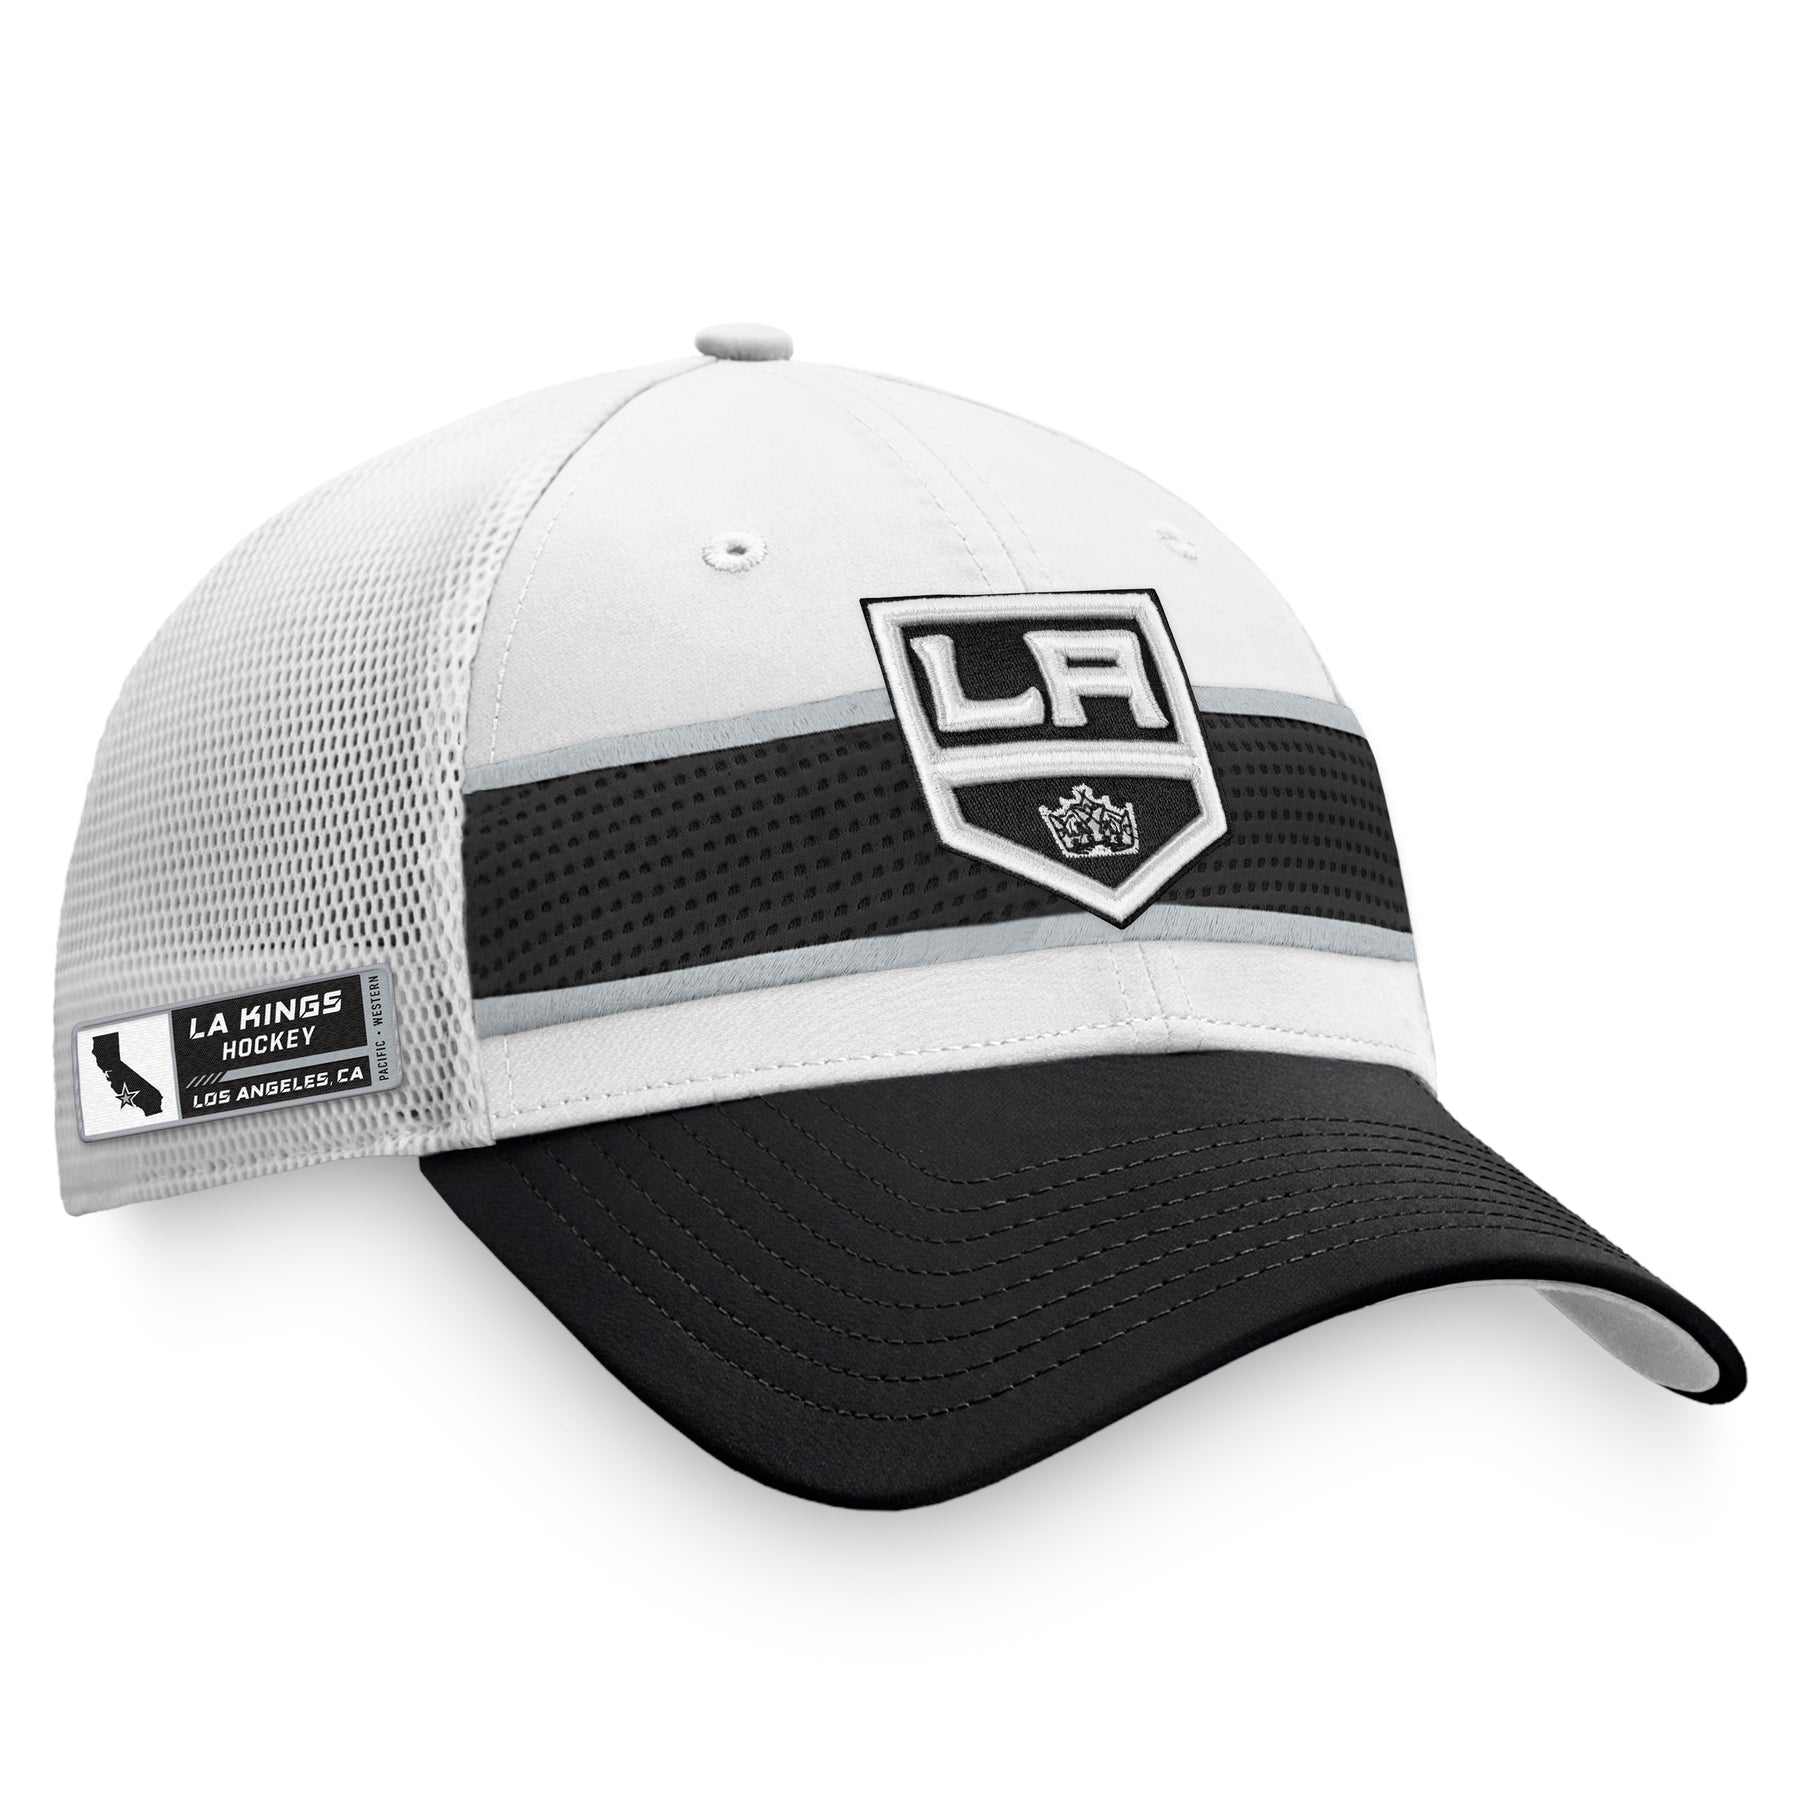 Fanatics Branded Los Angeles Kings White/Black 2021 NHL Draft Authentic Pro on Stage Trucker Snapback Hat